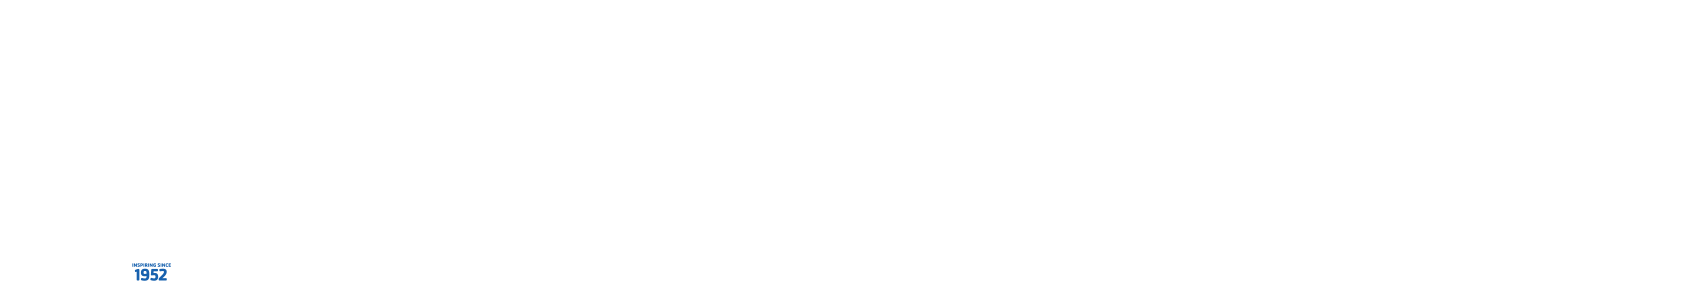 Ohio YMCA Youth and Government